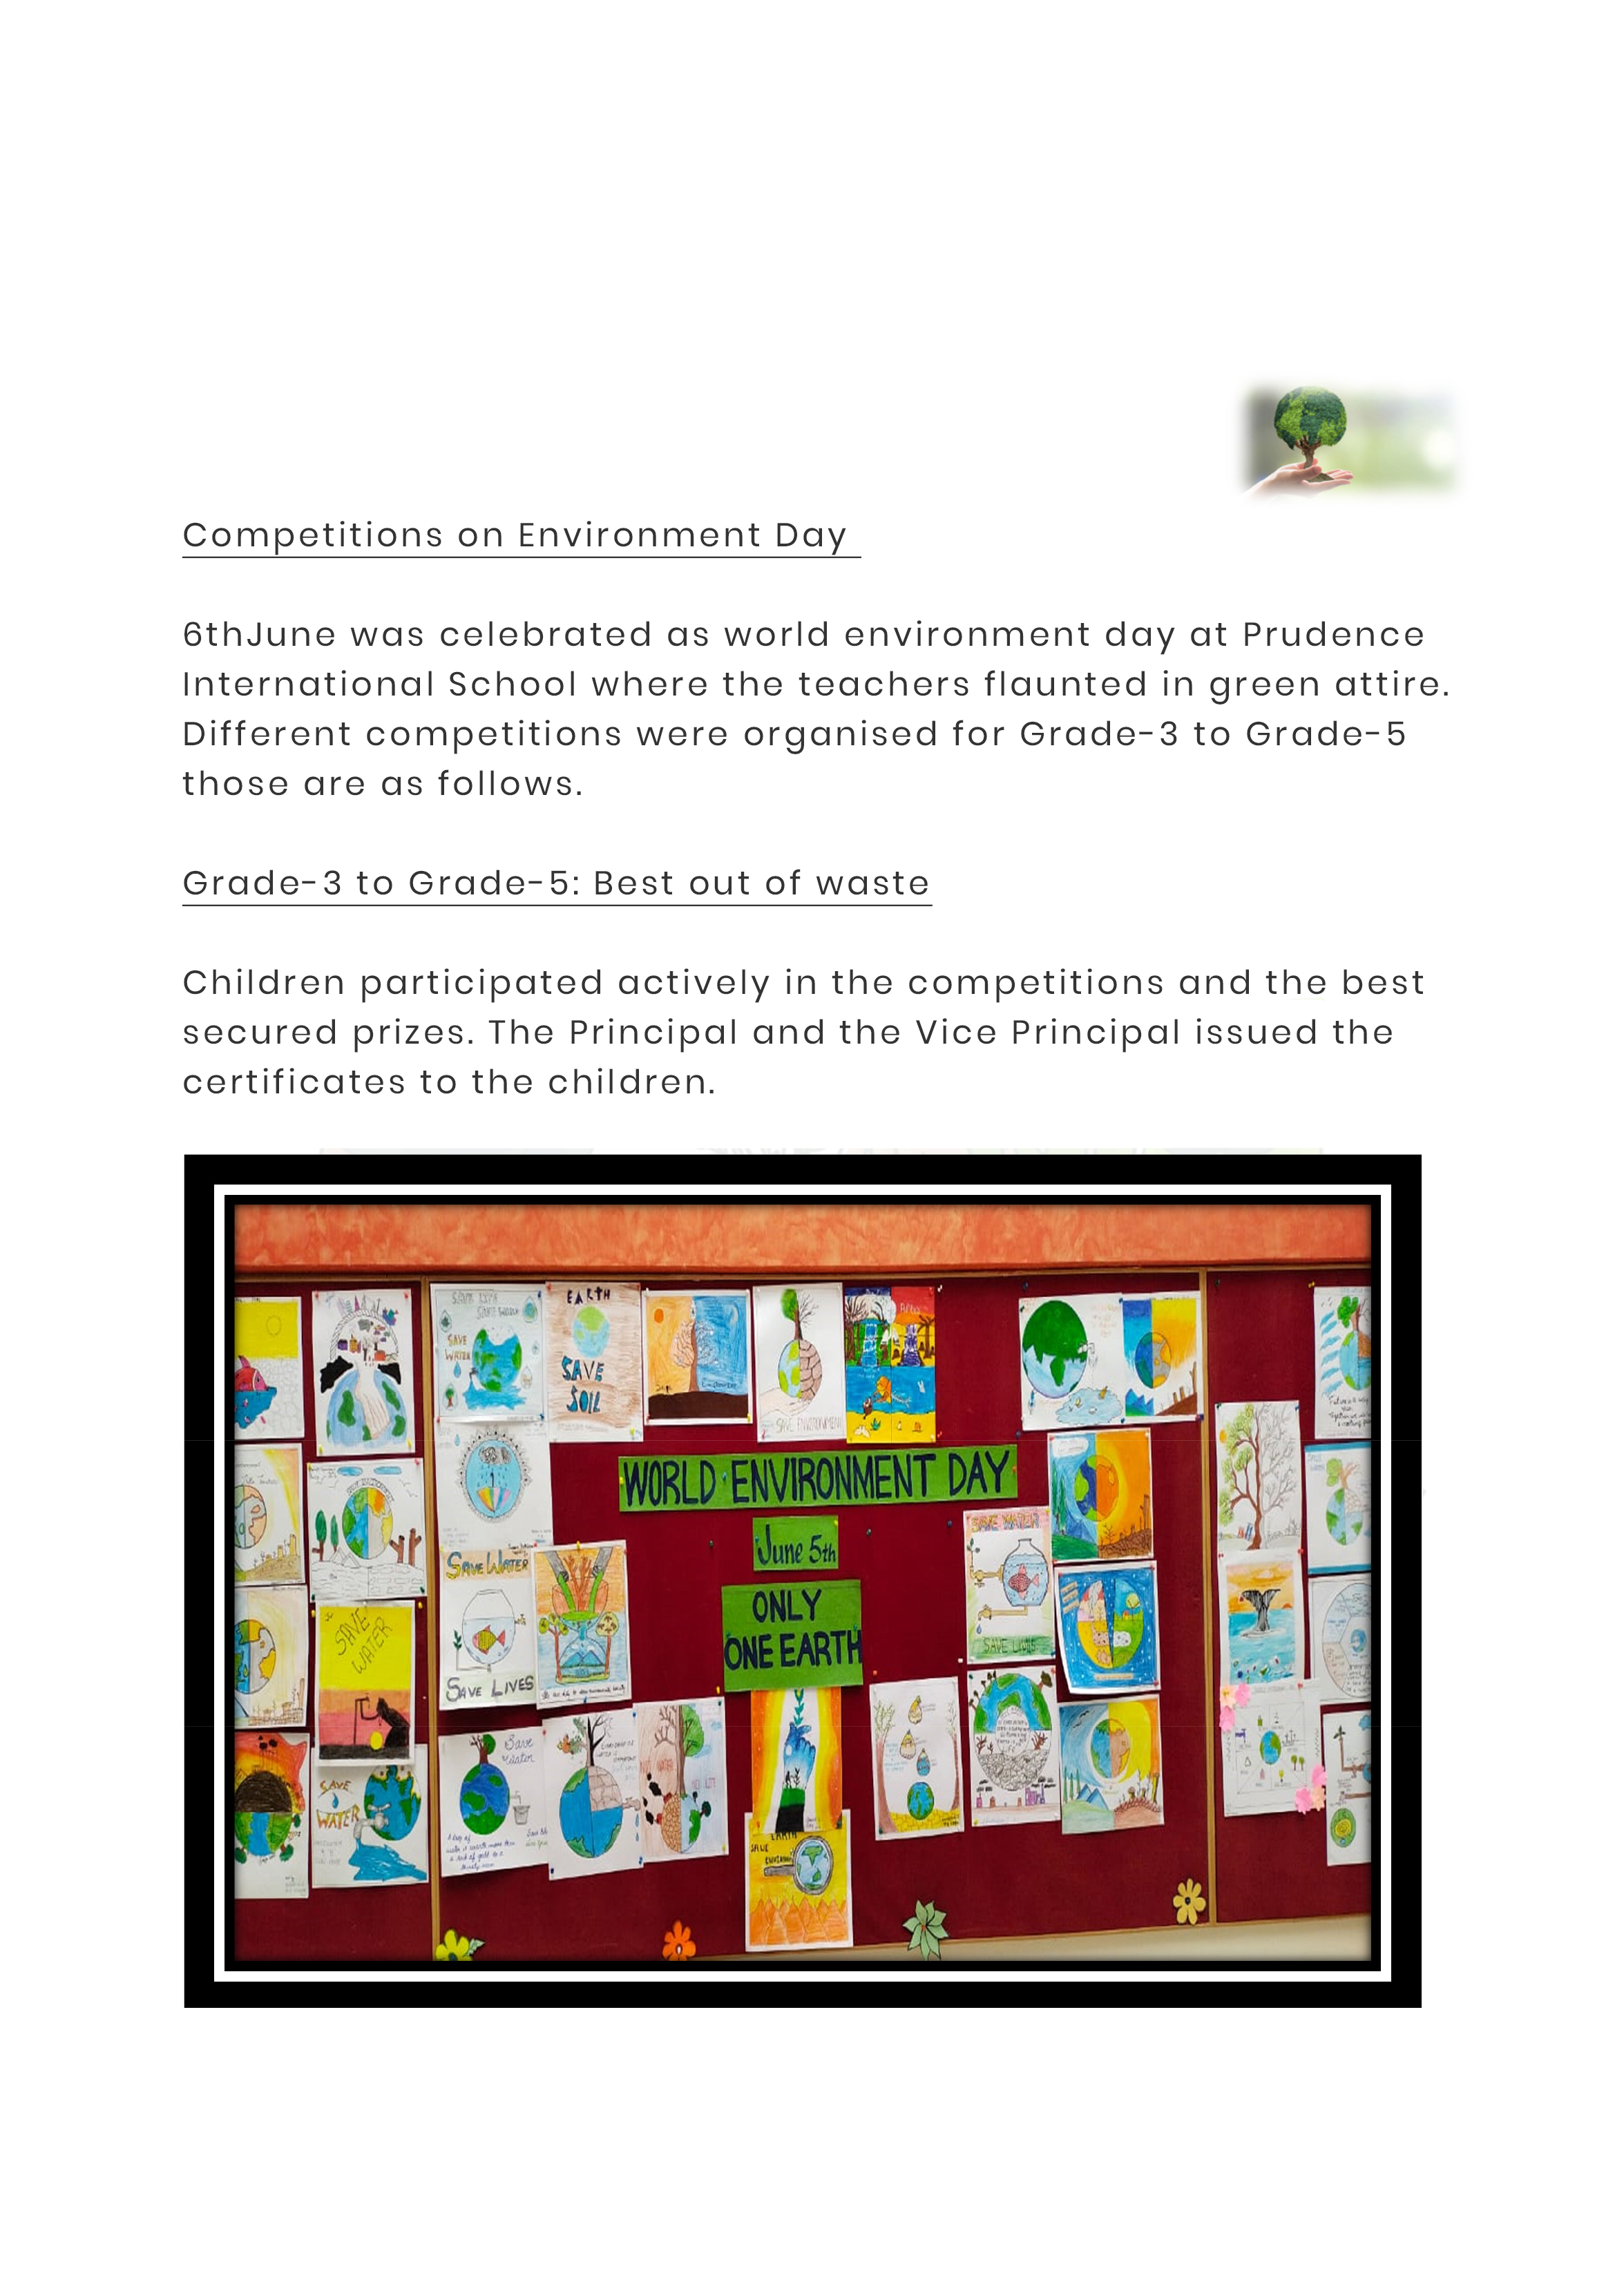 Prudence Environment Day